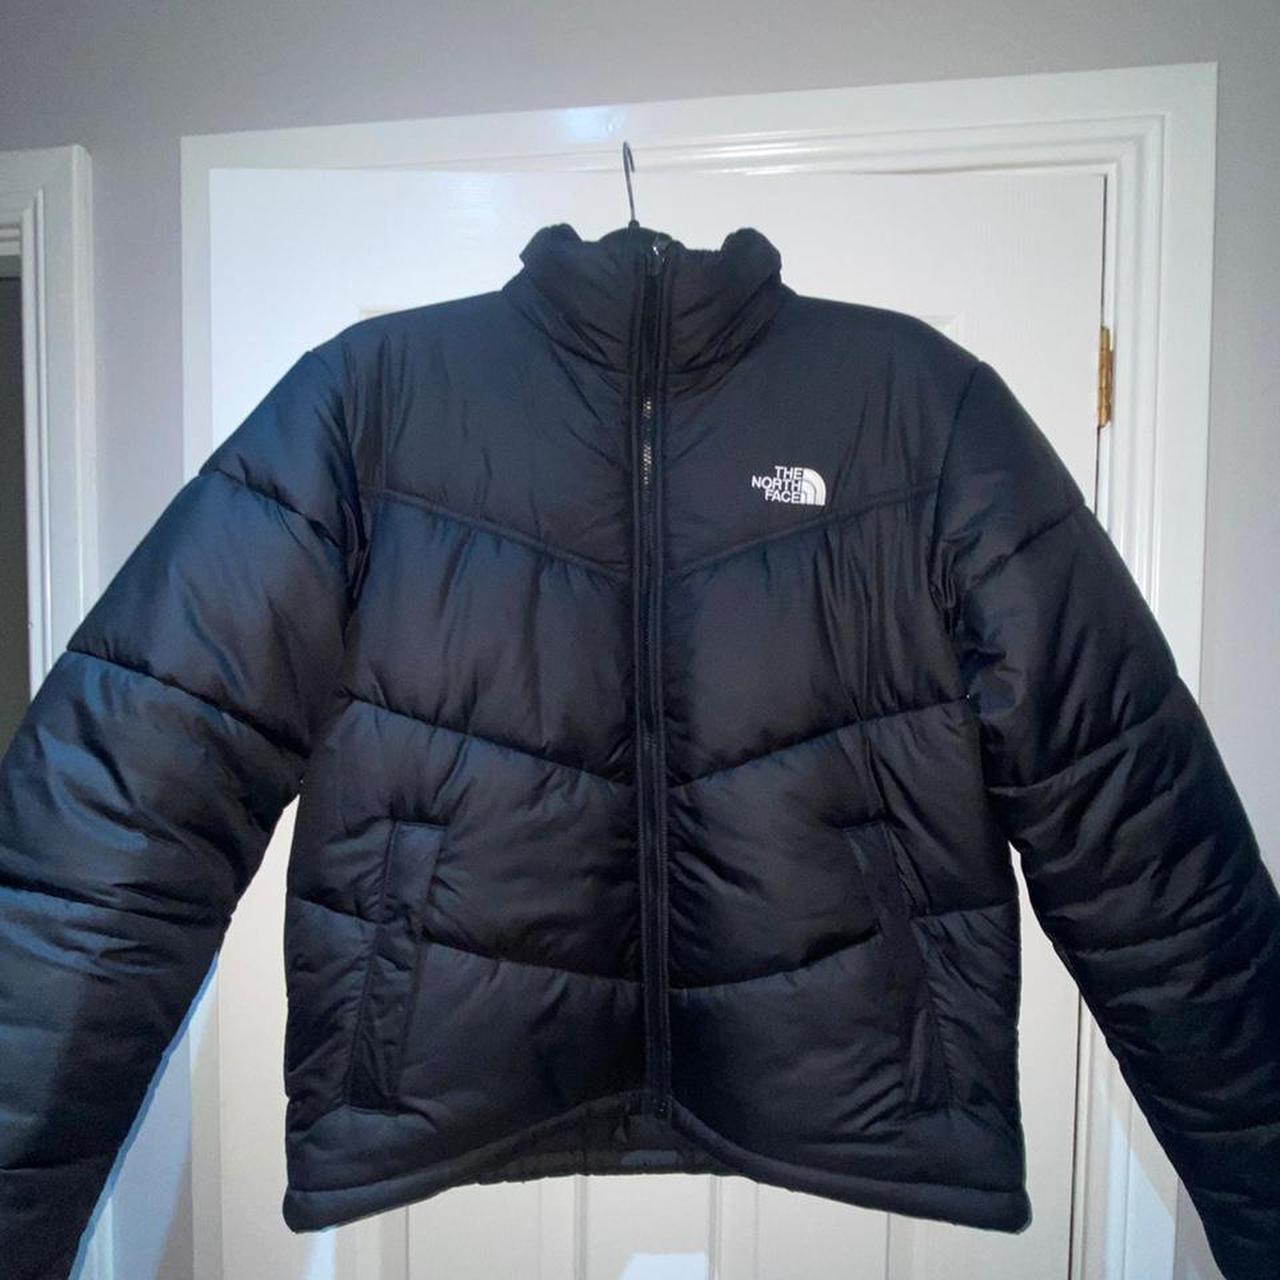 The North Face Men's Black and White Jacket | Depop